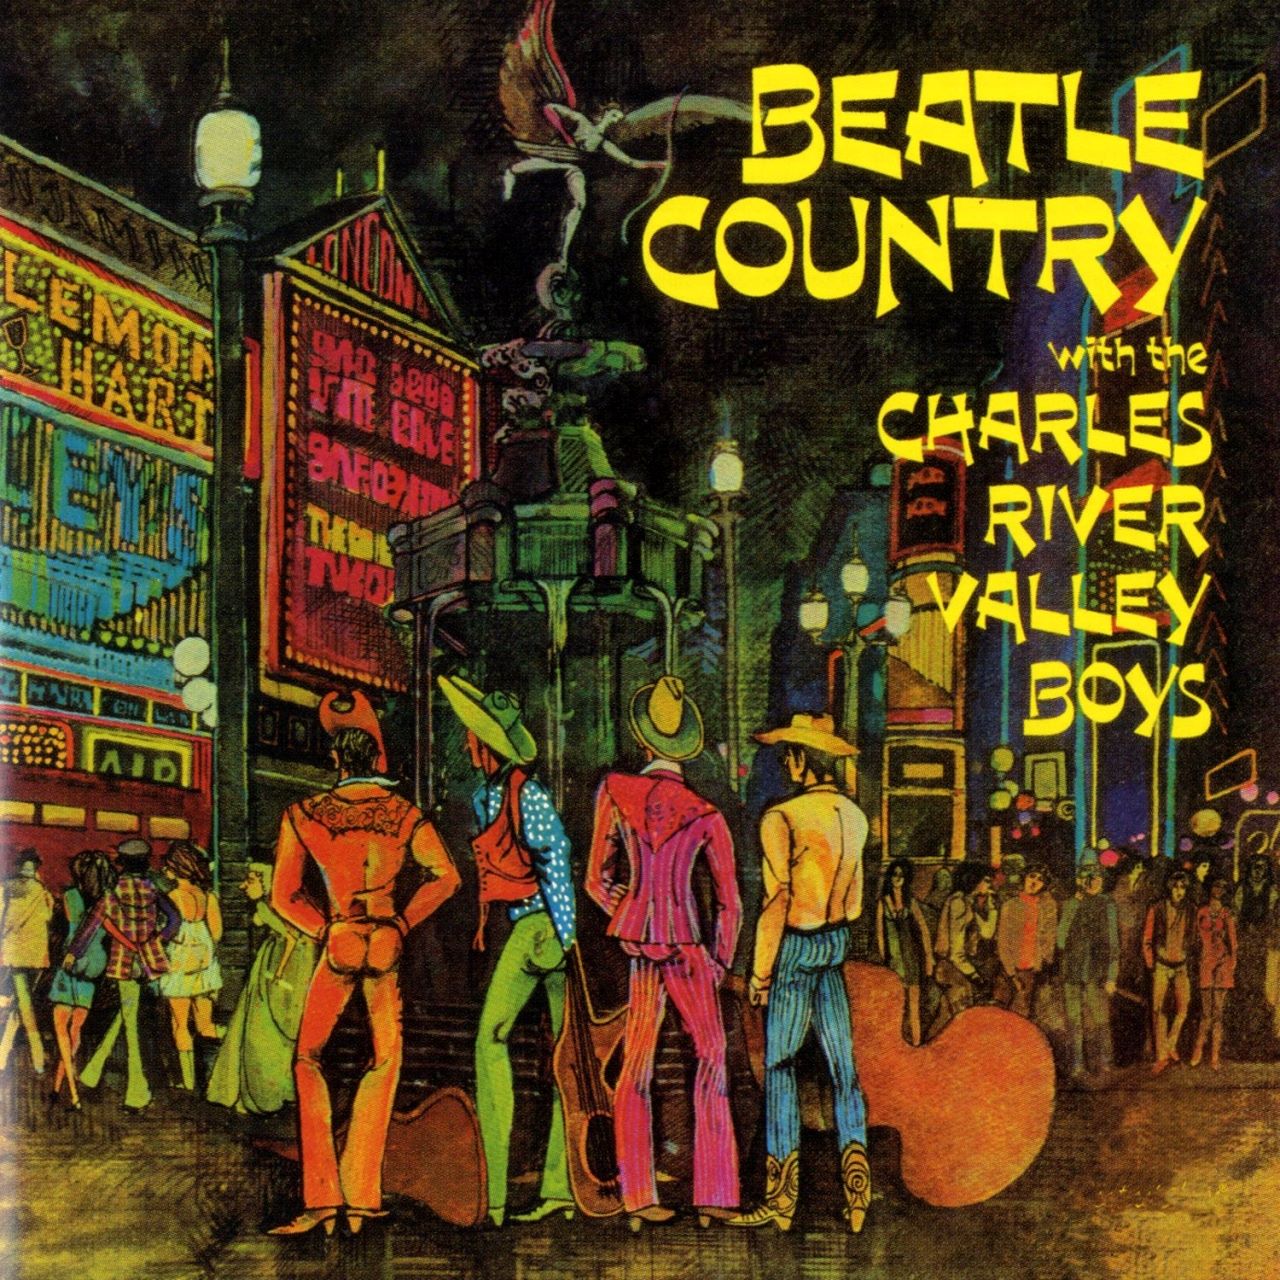 Charles River Valley Boys – Beatle Country cover album